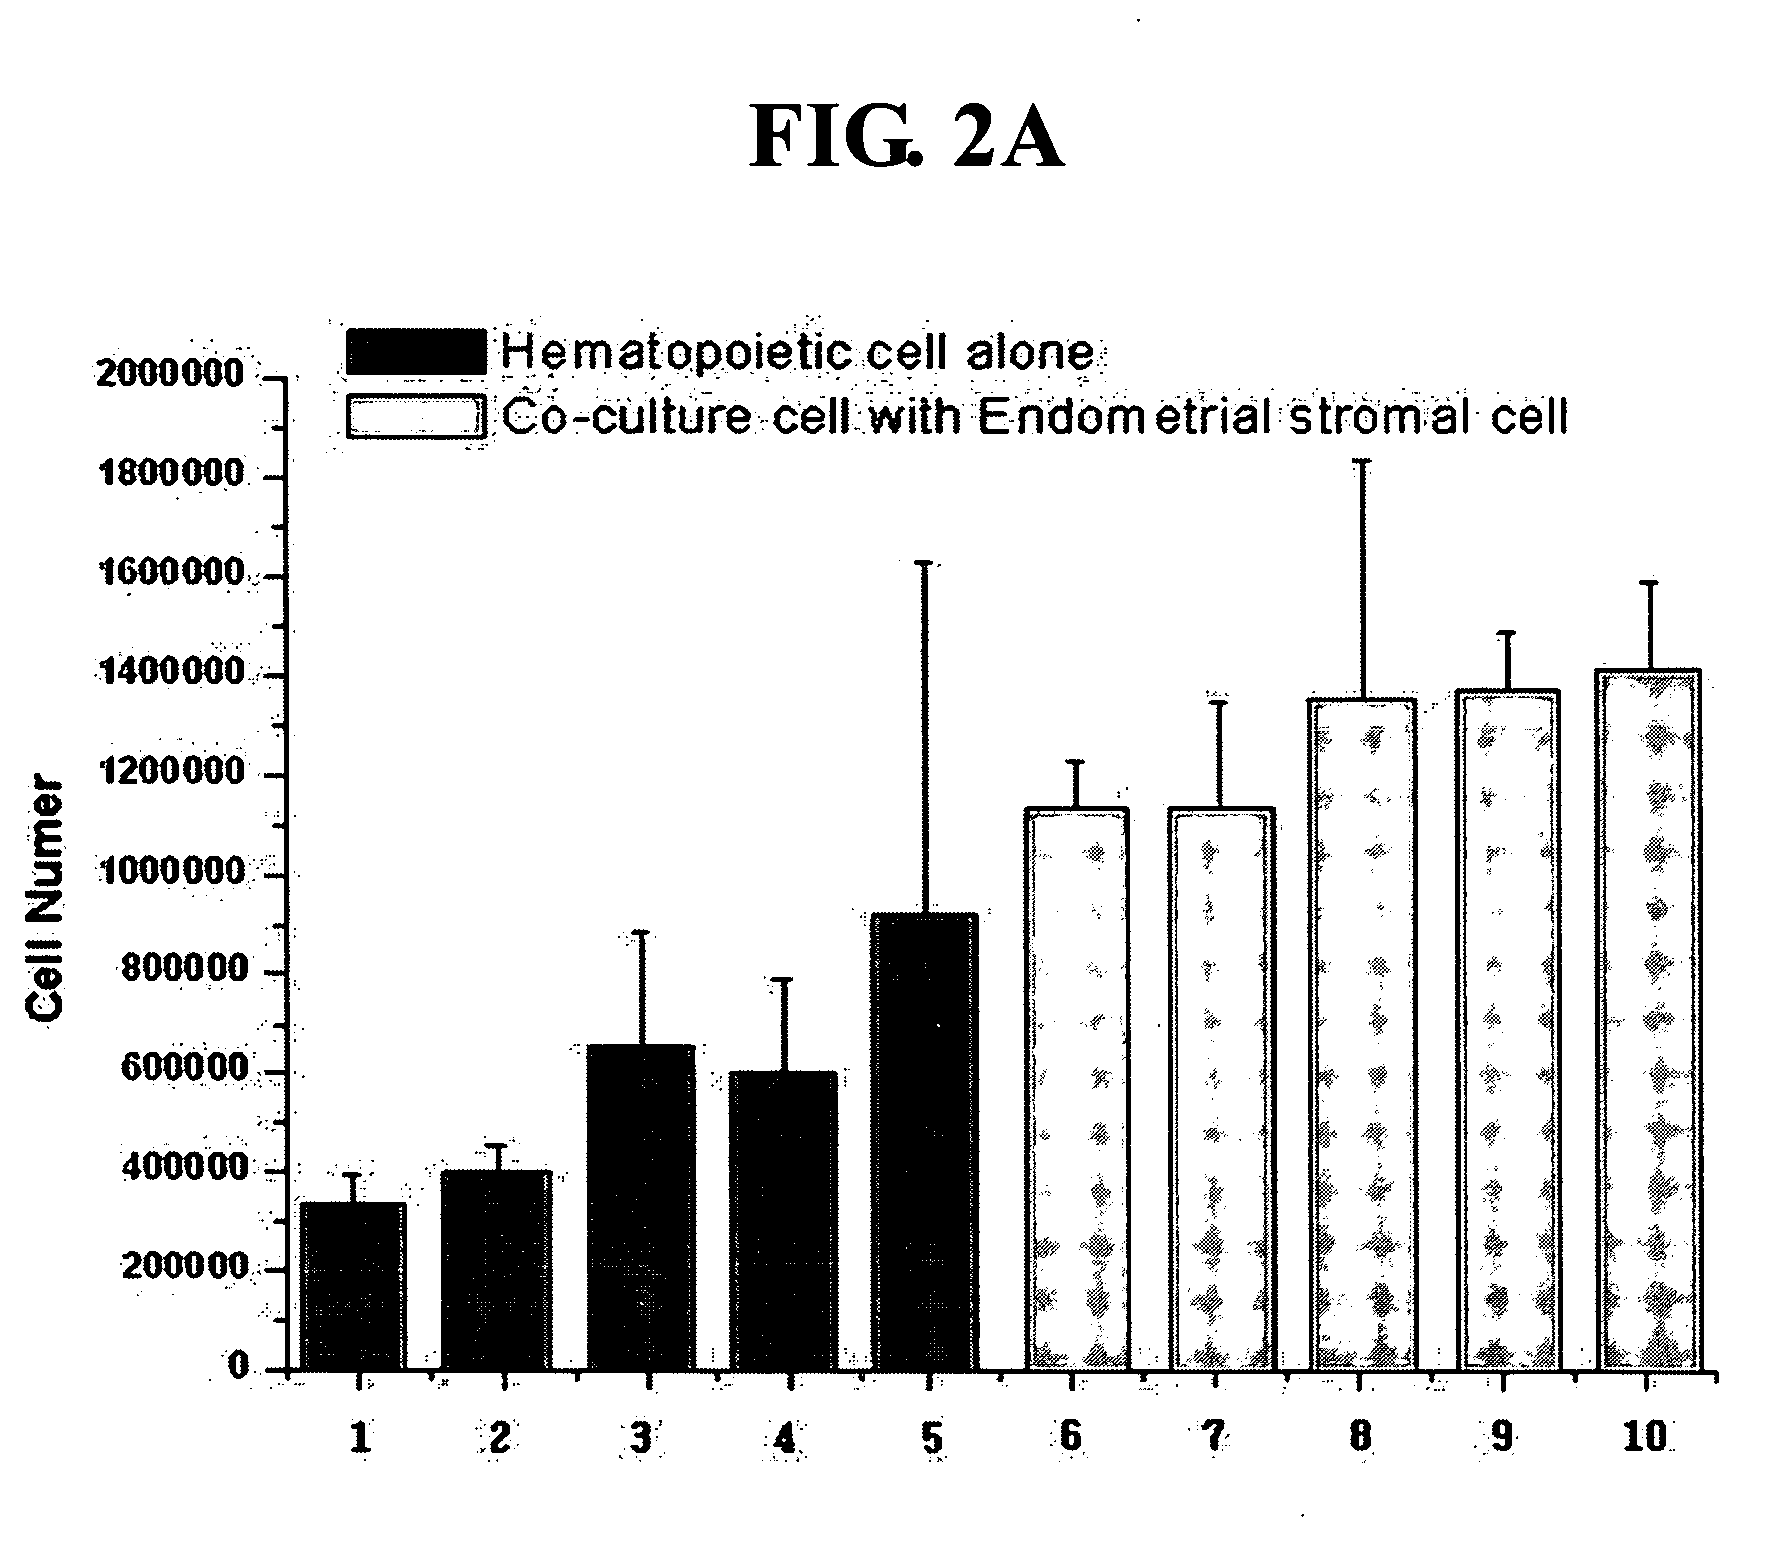 Method for culturing and proliferating hematopoietic stem cells and progenitor cells using human endometrial cells